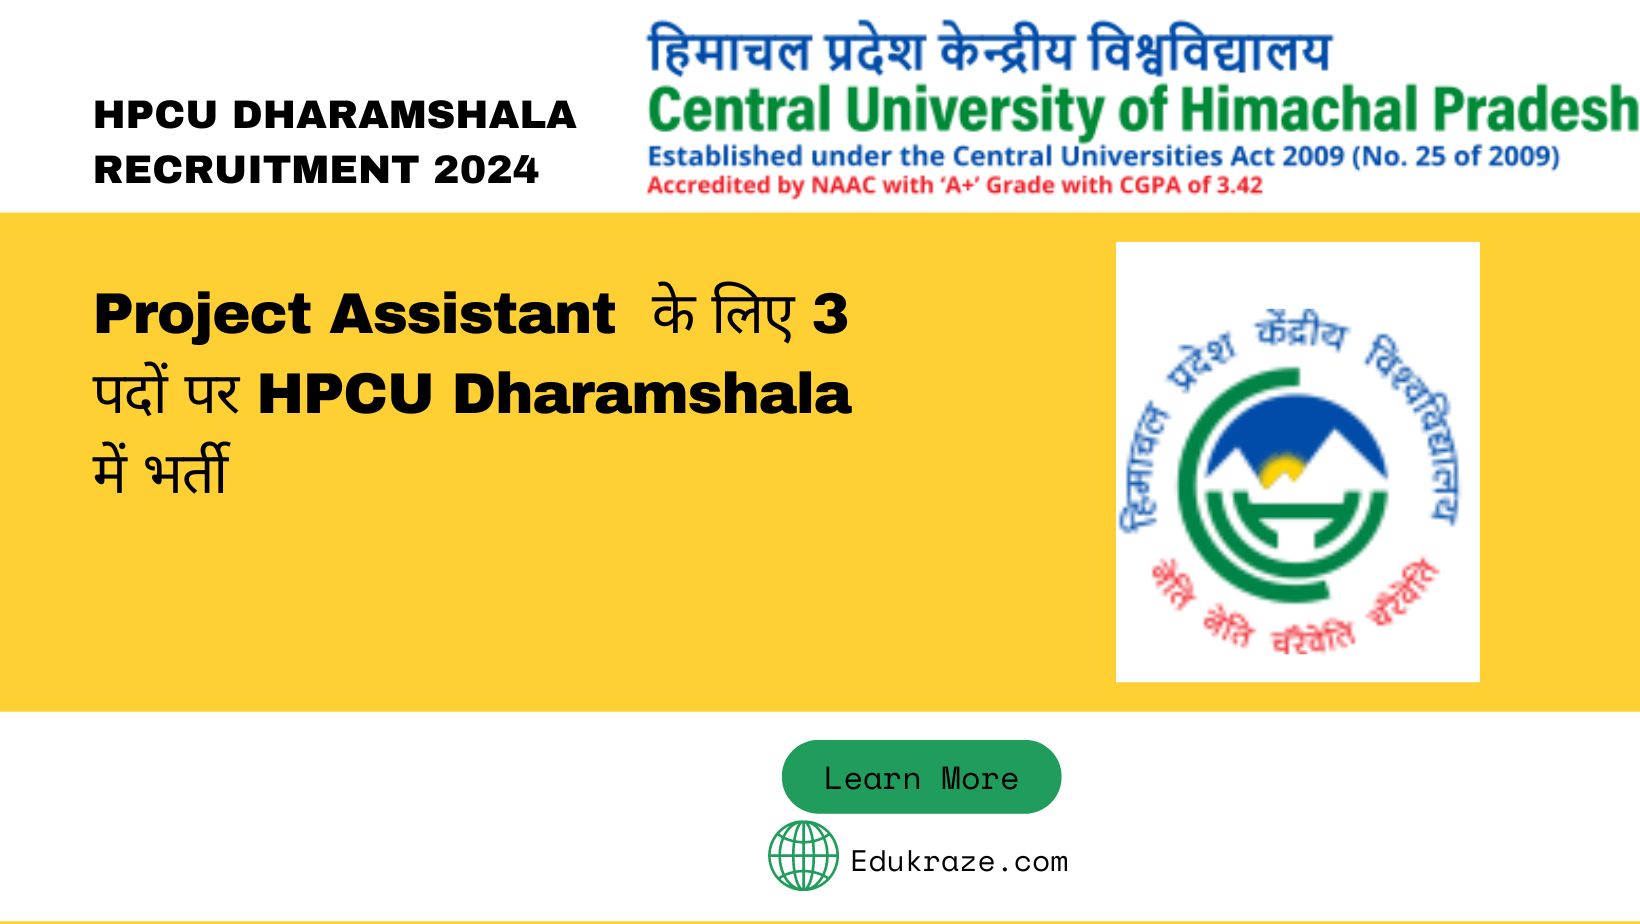 Project Assistant Recruitment 2024 at HPCU Dharamshala